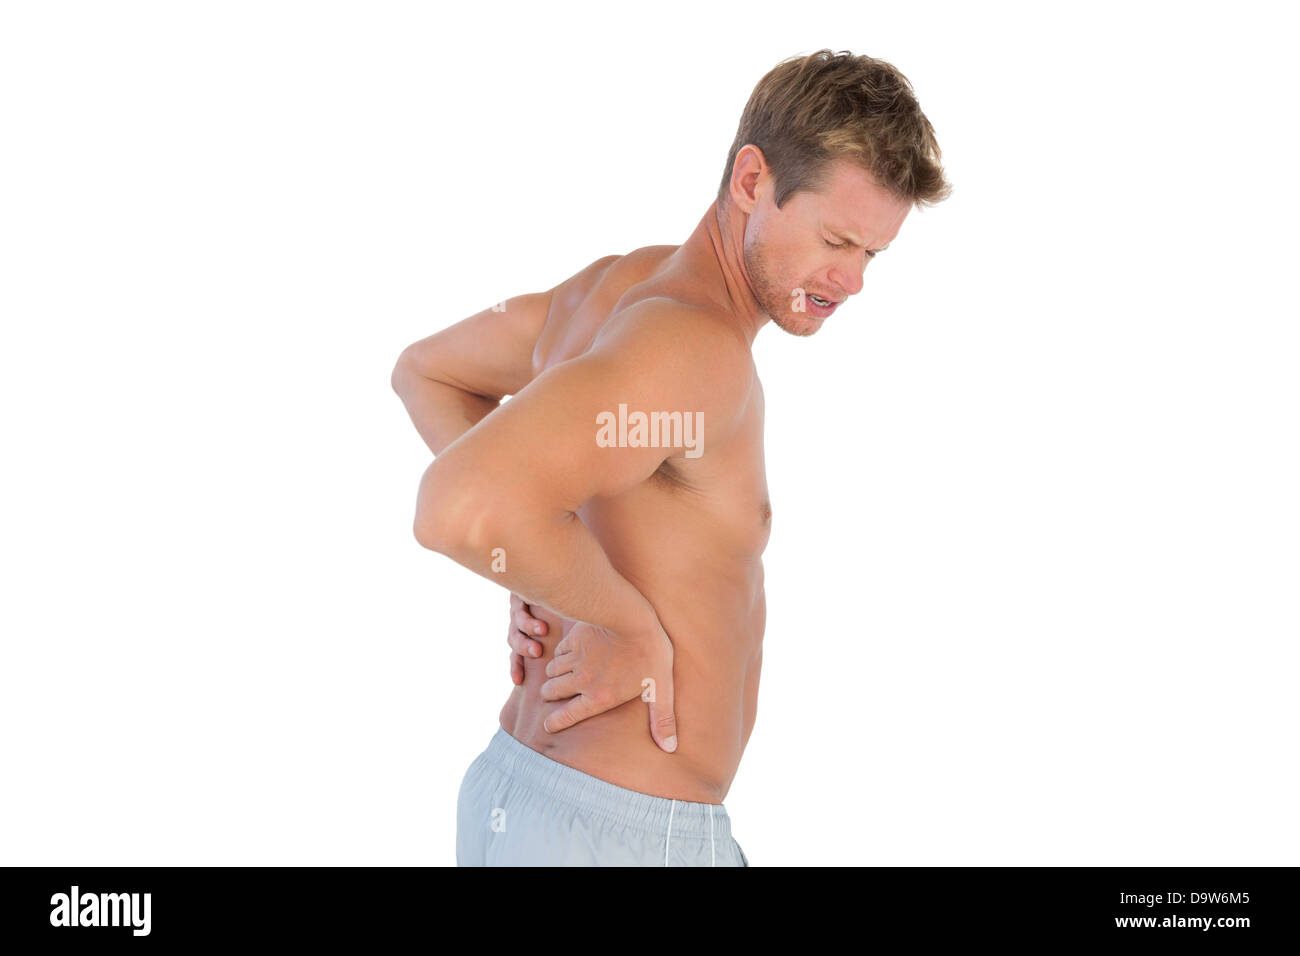 Topless man suffering from back pain Stock Photo